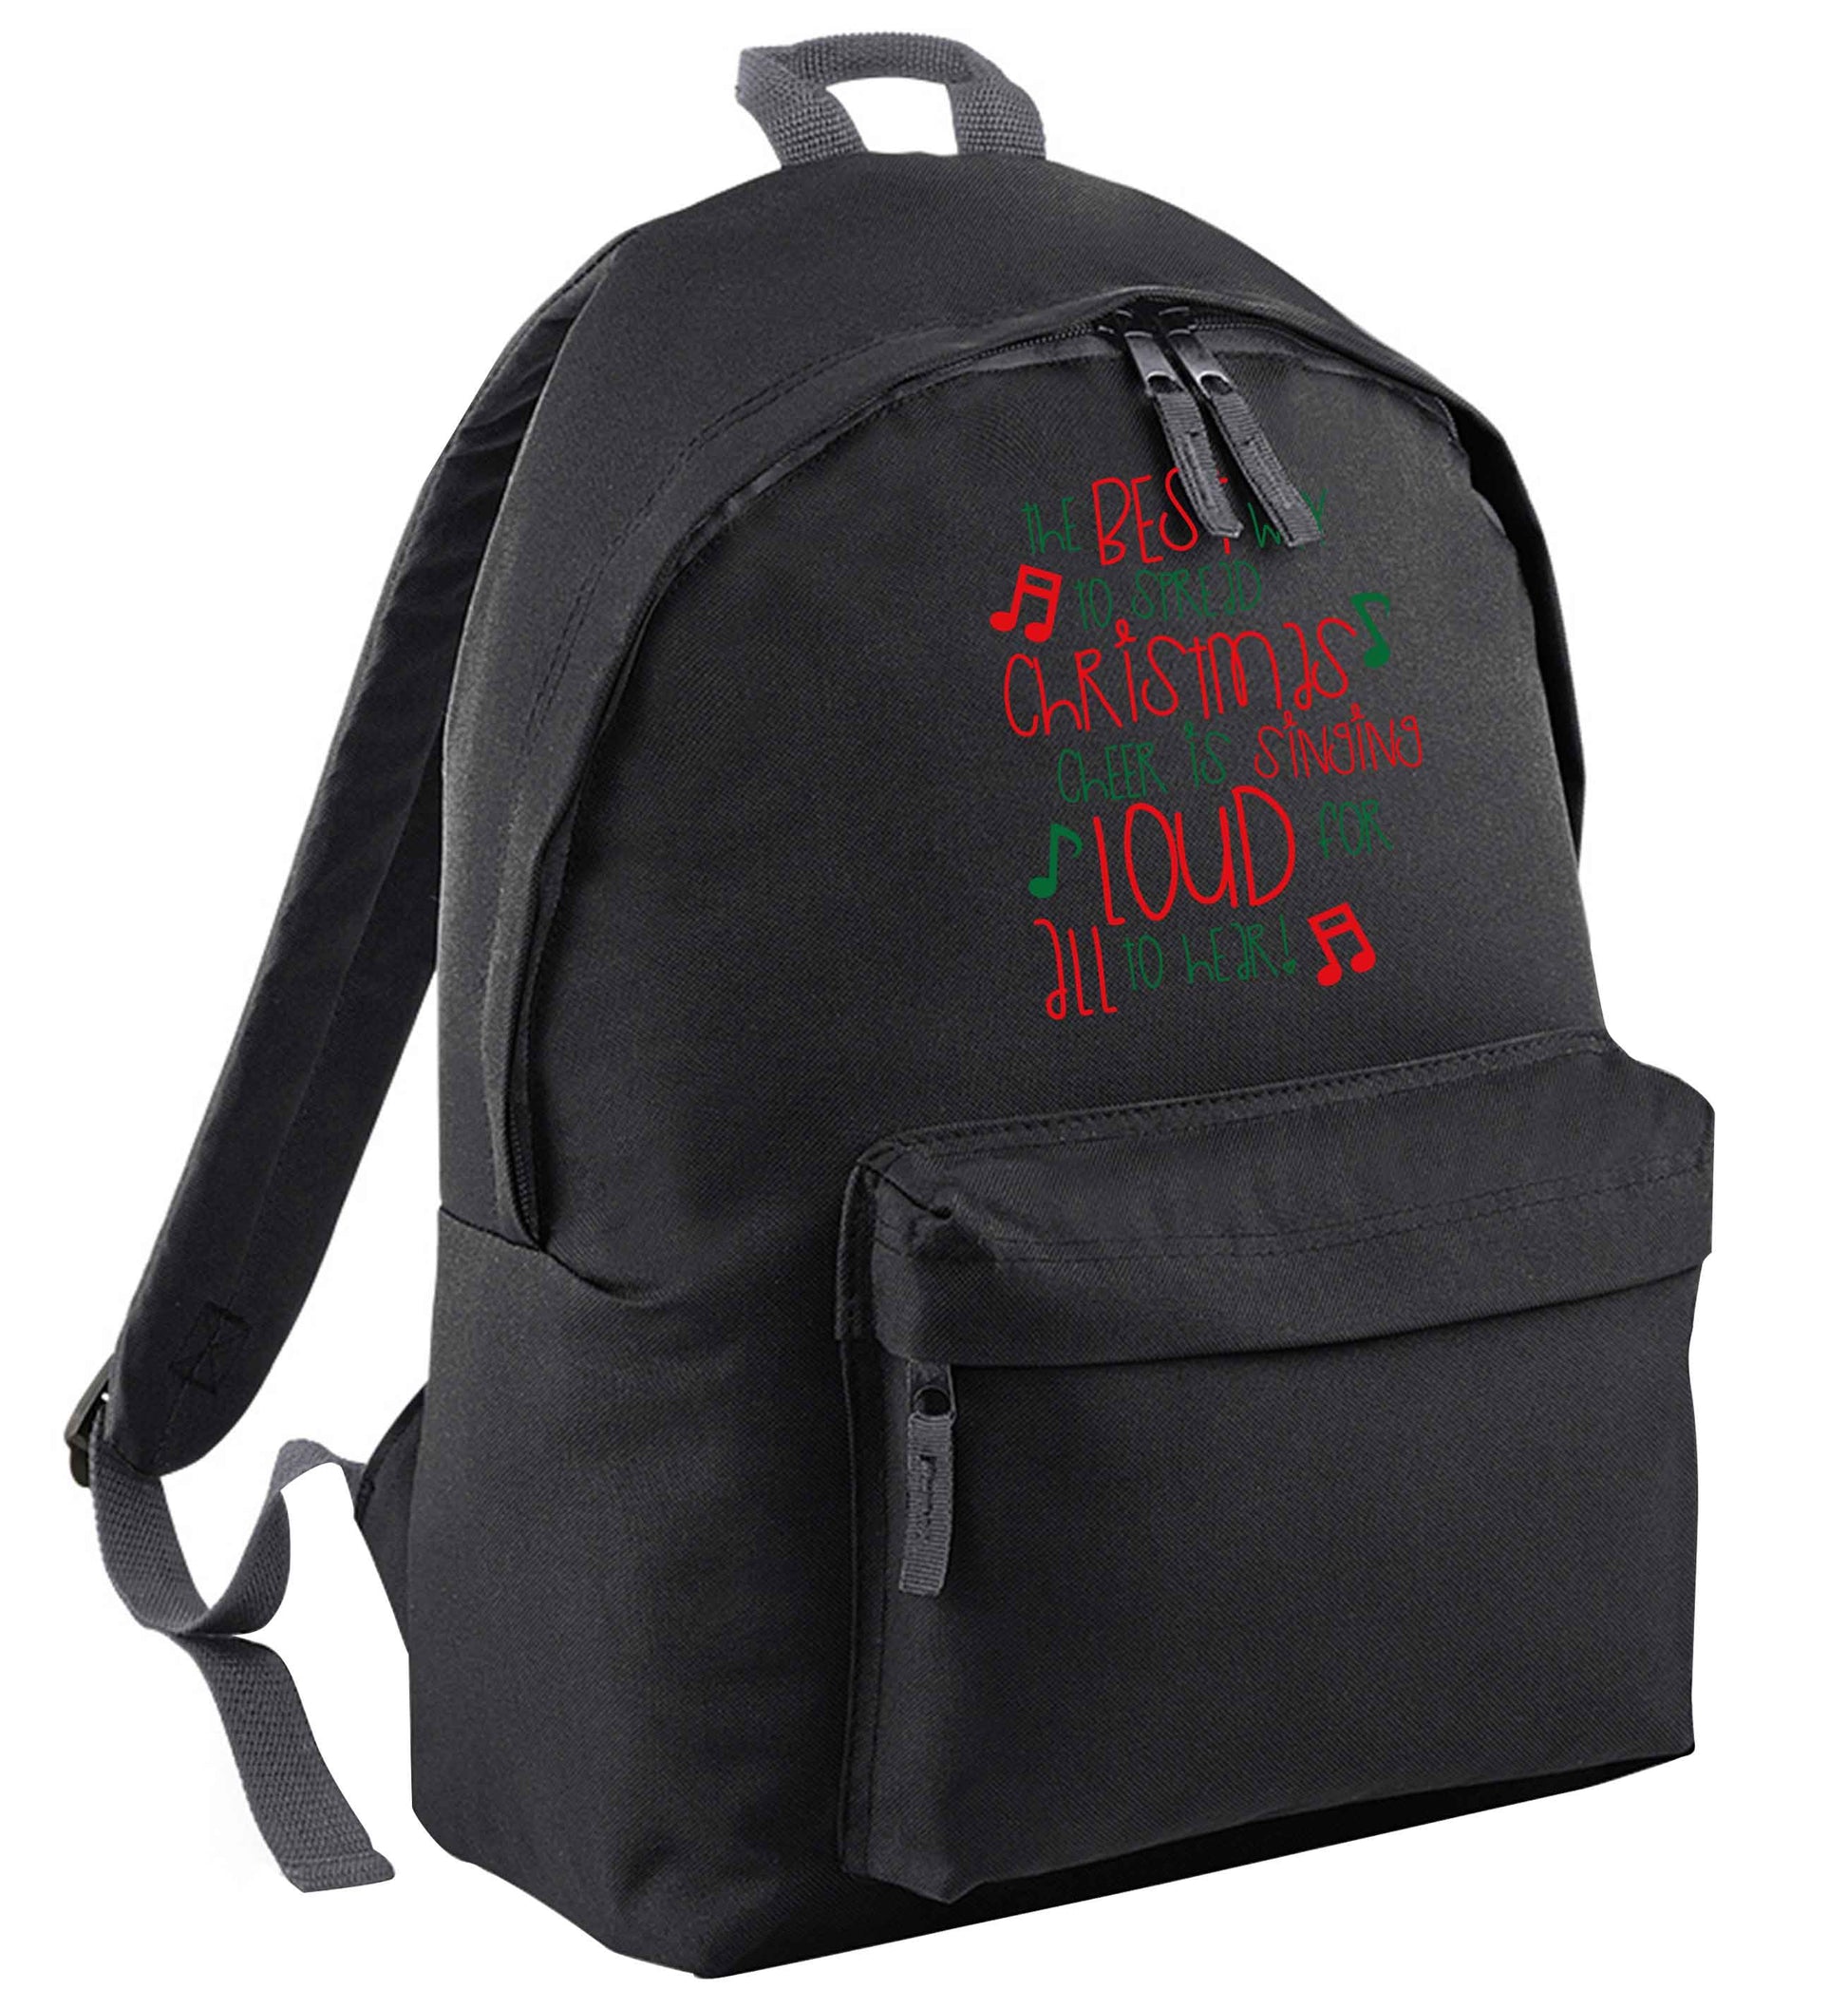 The best way to spread Christmas cheer is singing loud for all to hear black adults backpack